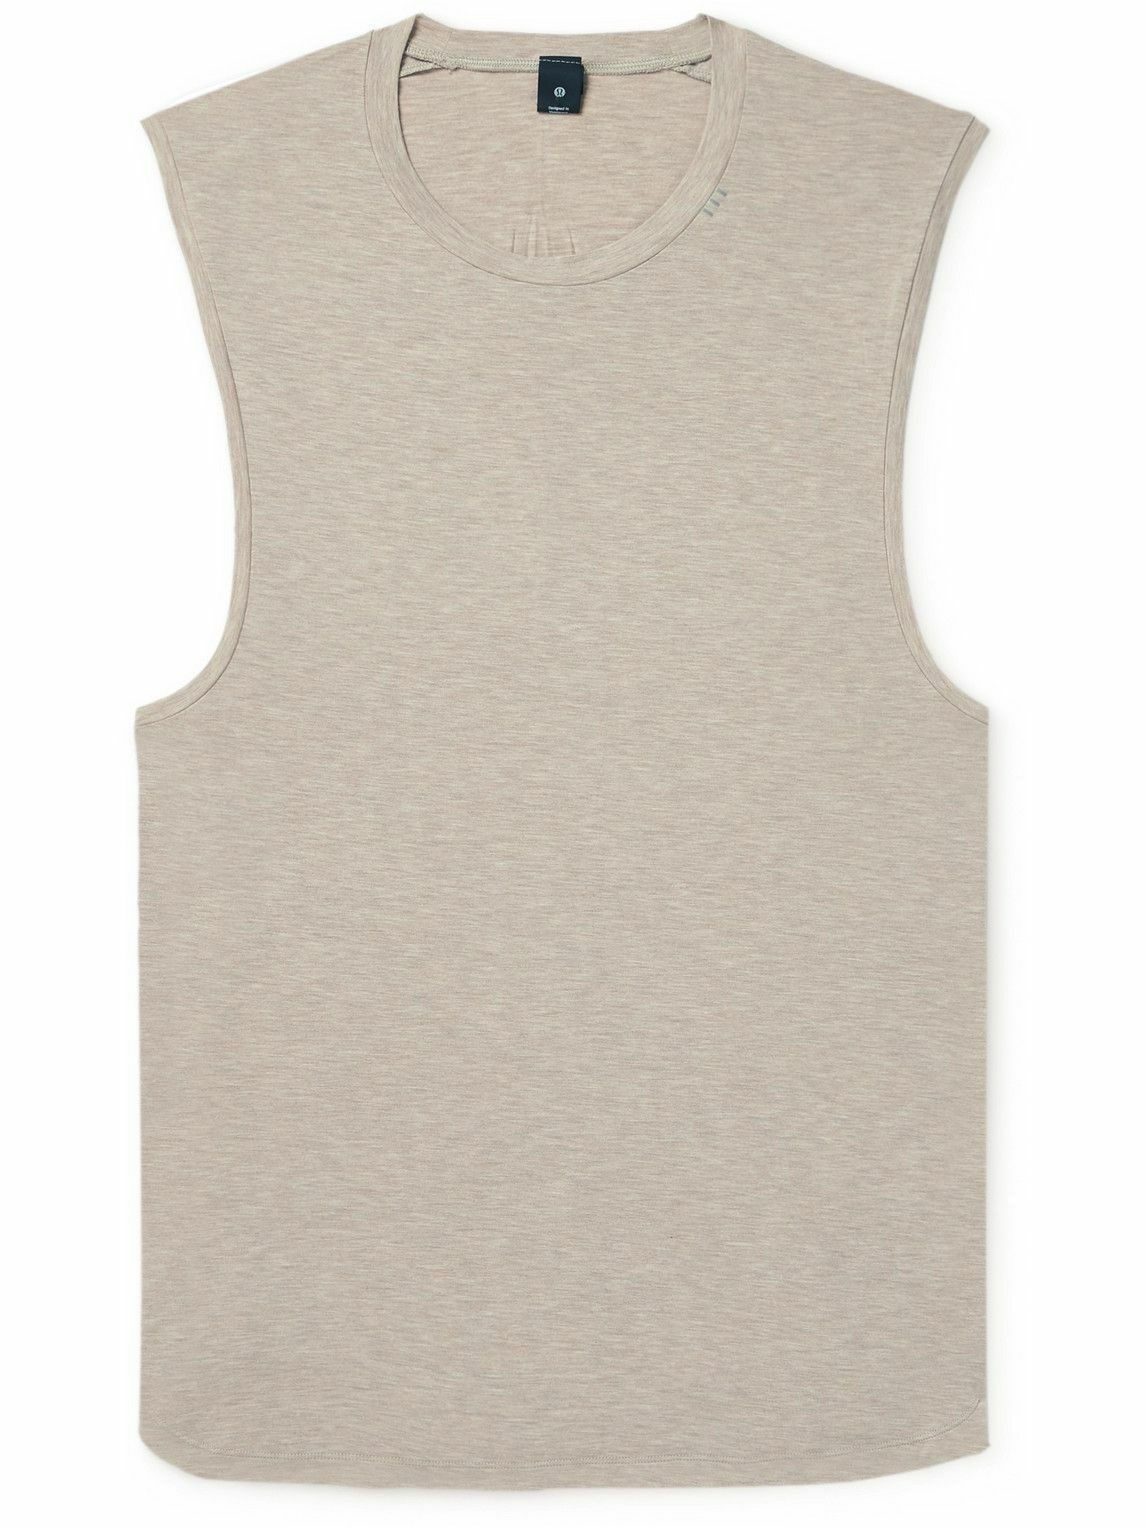 Japanese Lenzing Modal Jersey in Taupe Grey